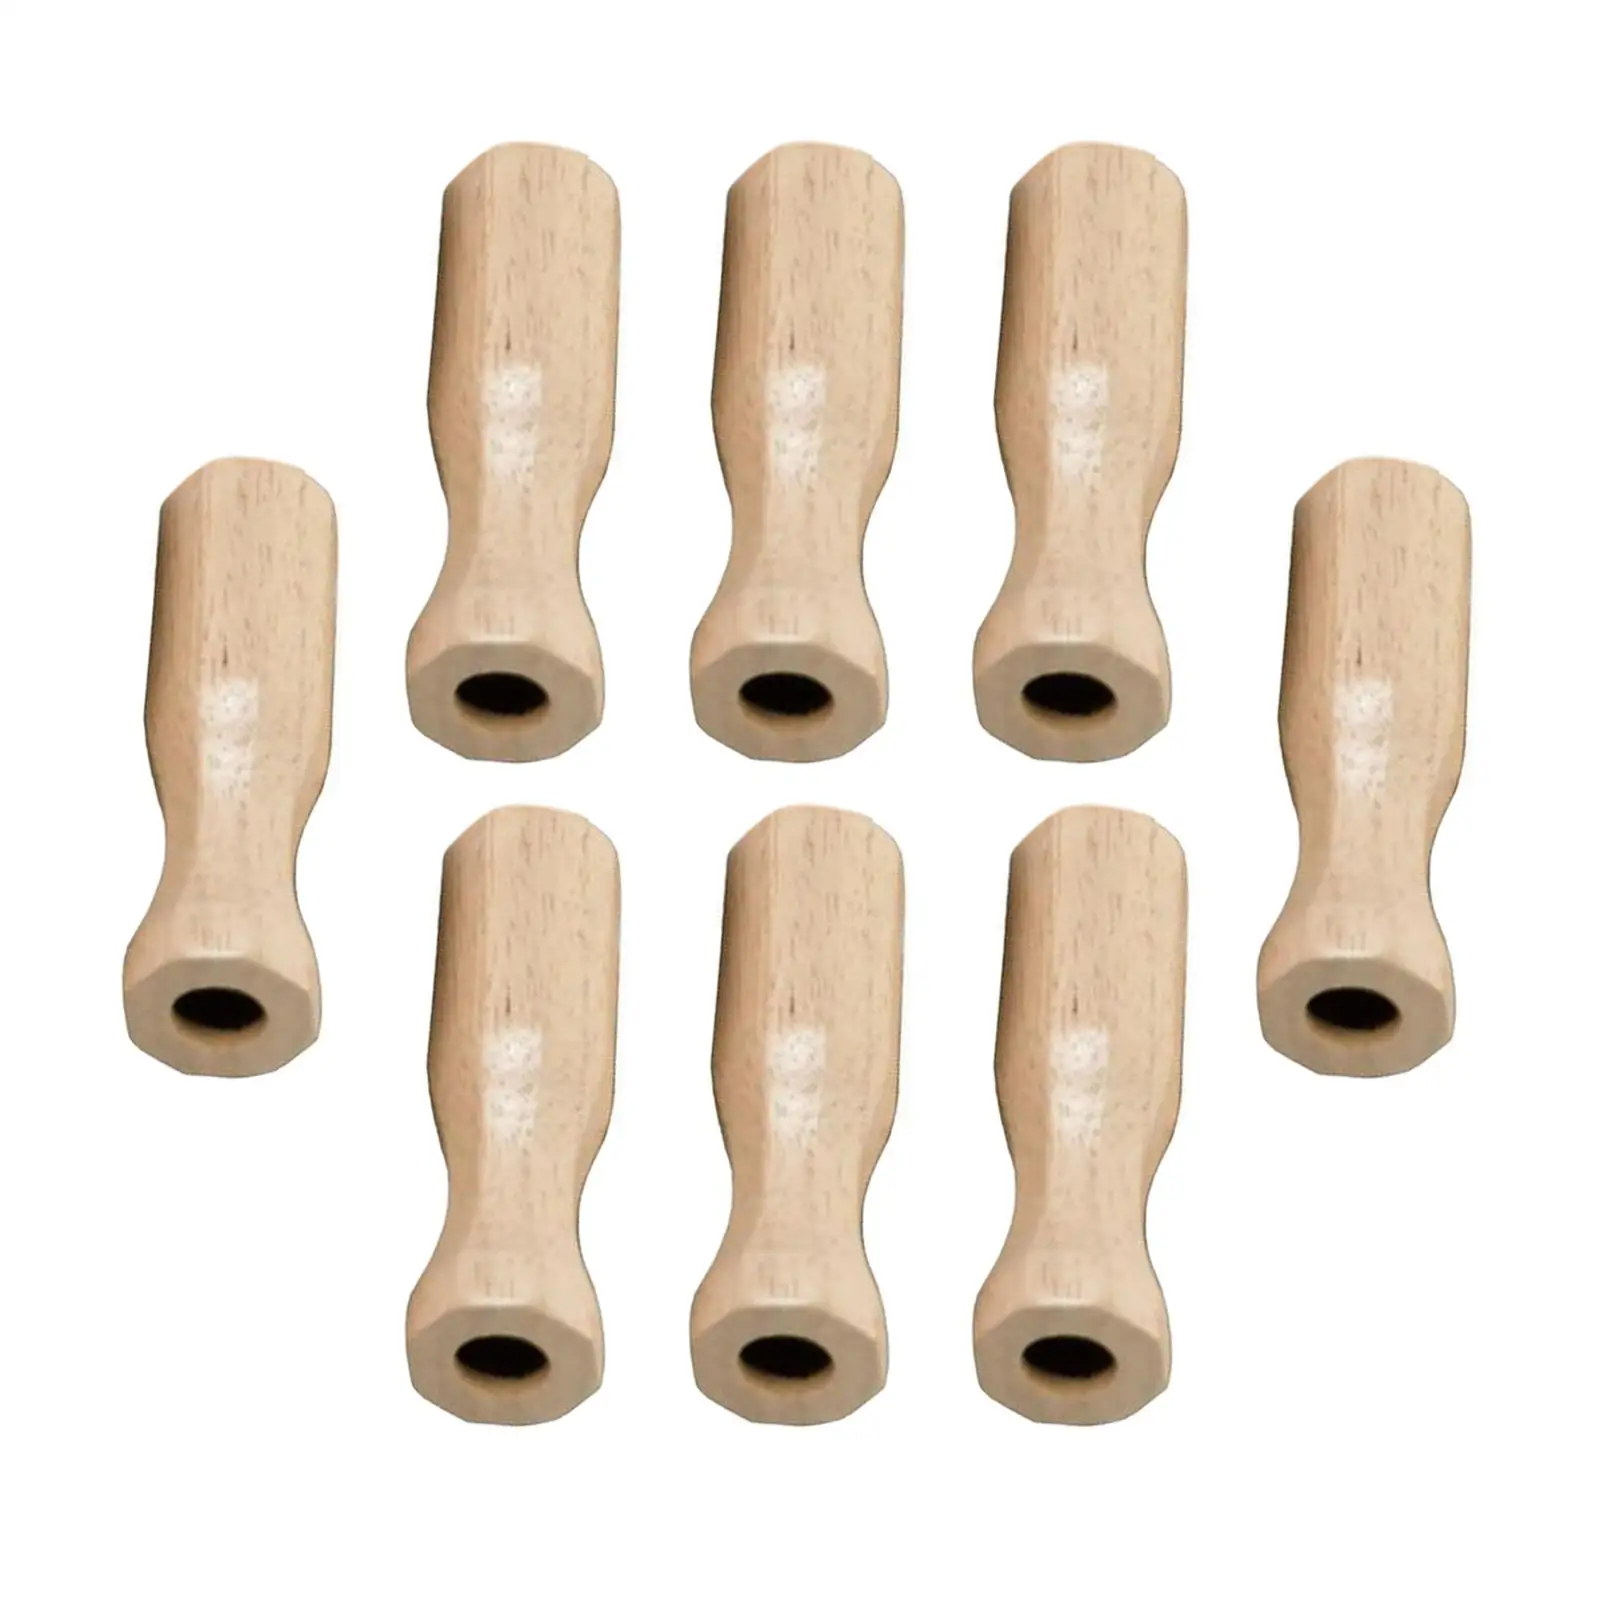 8x Soccer Table Handles Accessory Wooden Foosball Handle Rod Replacements